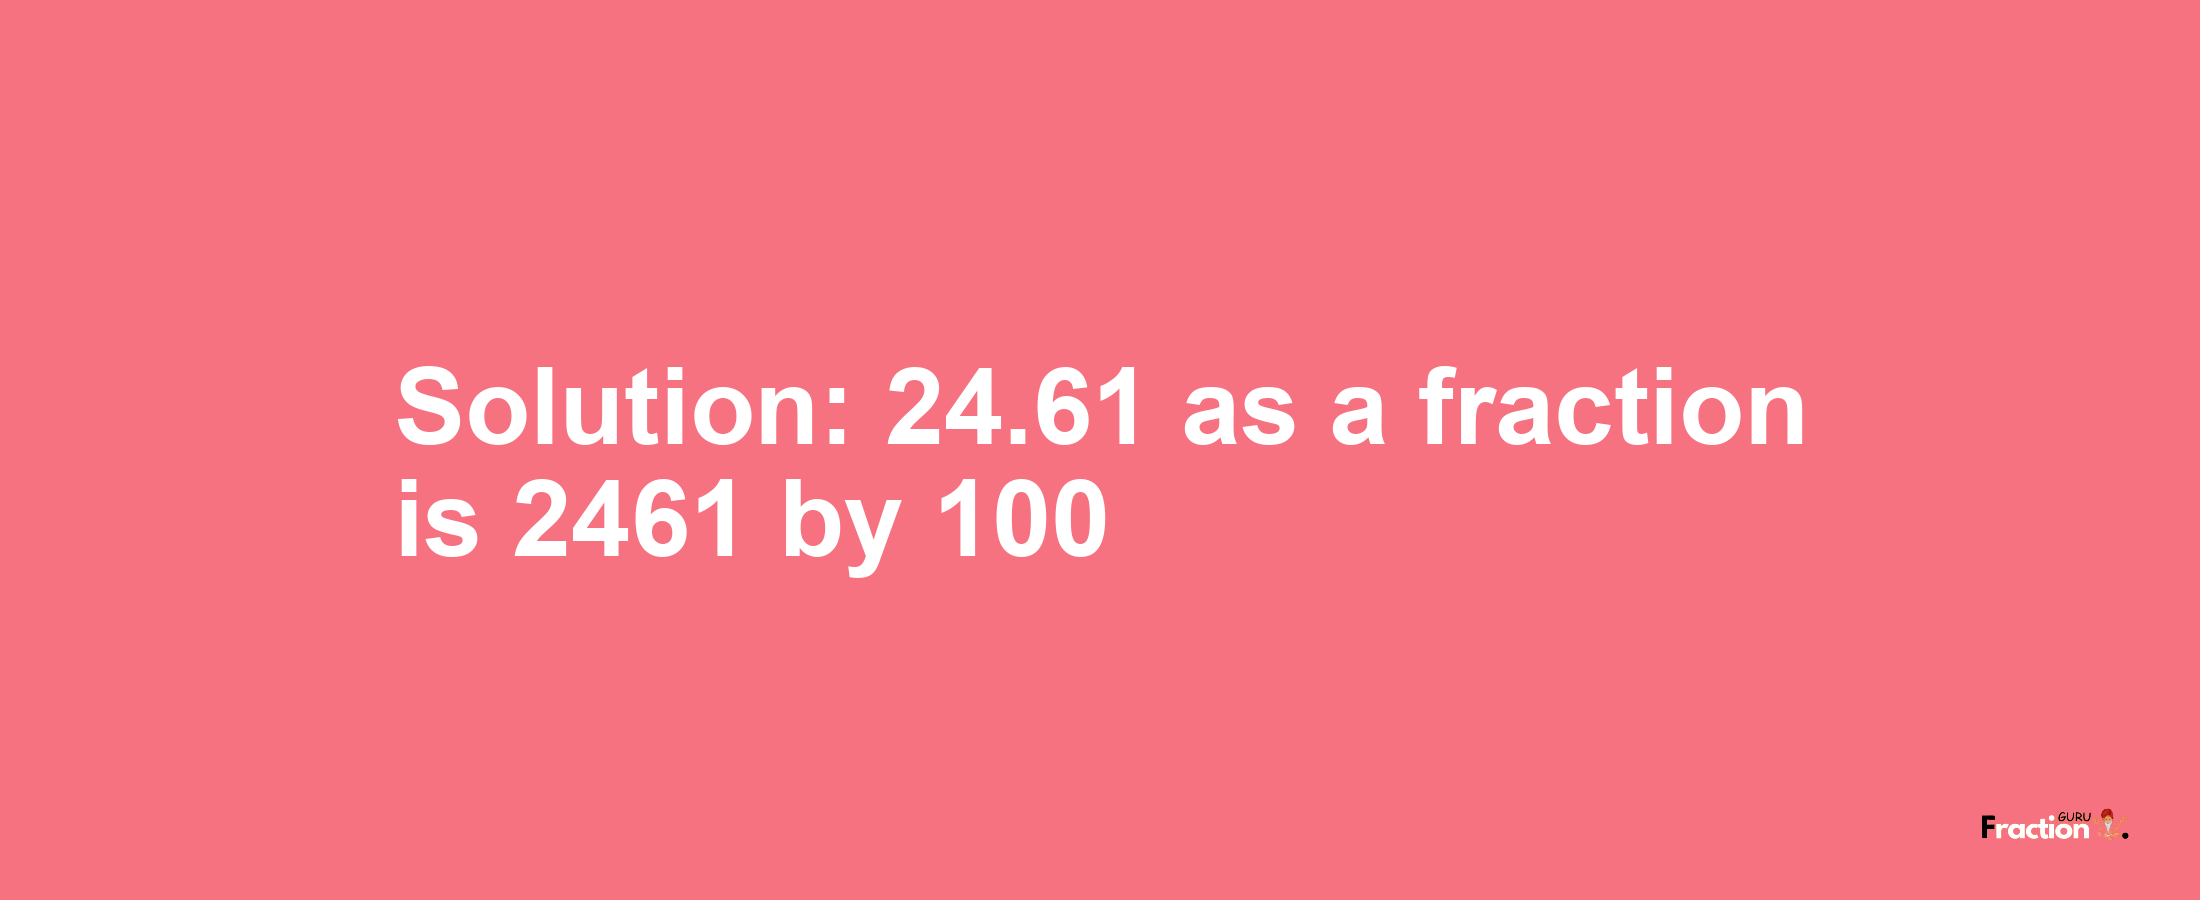 Solution:24.61 as a fraction is 2461/100